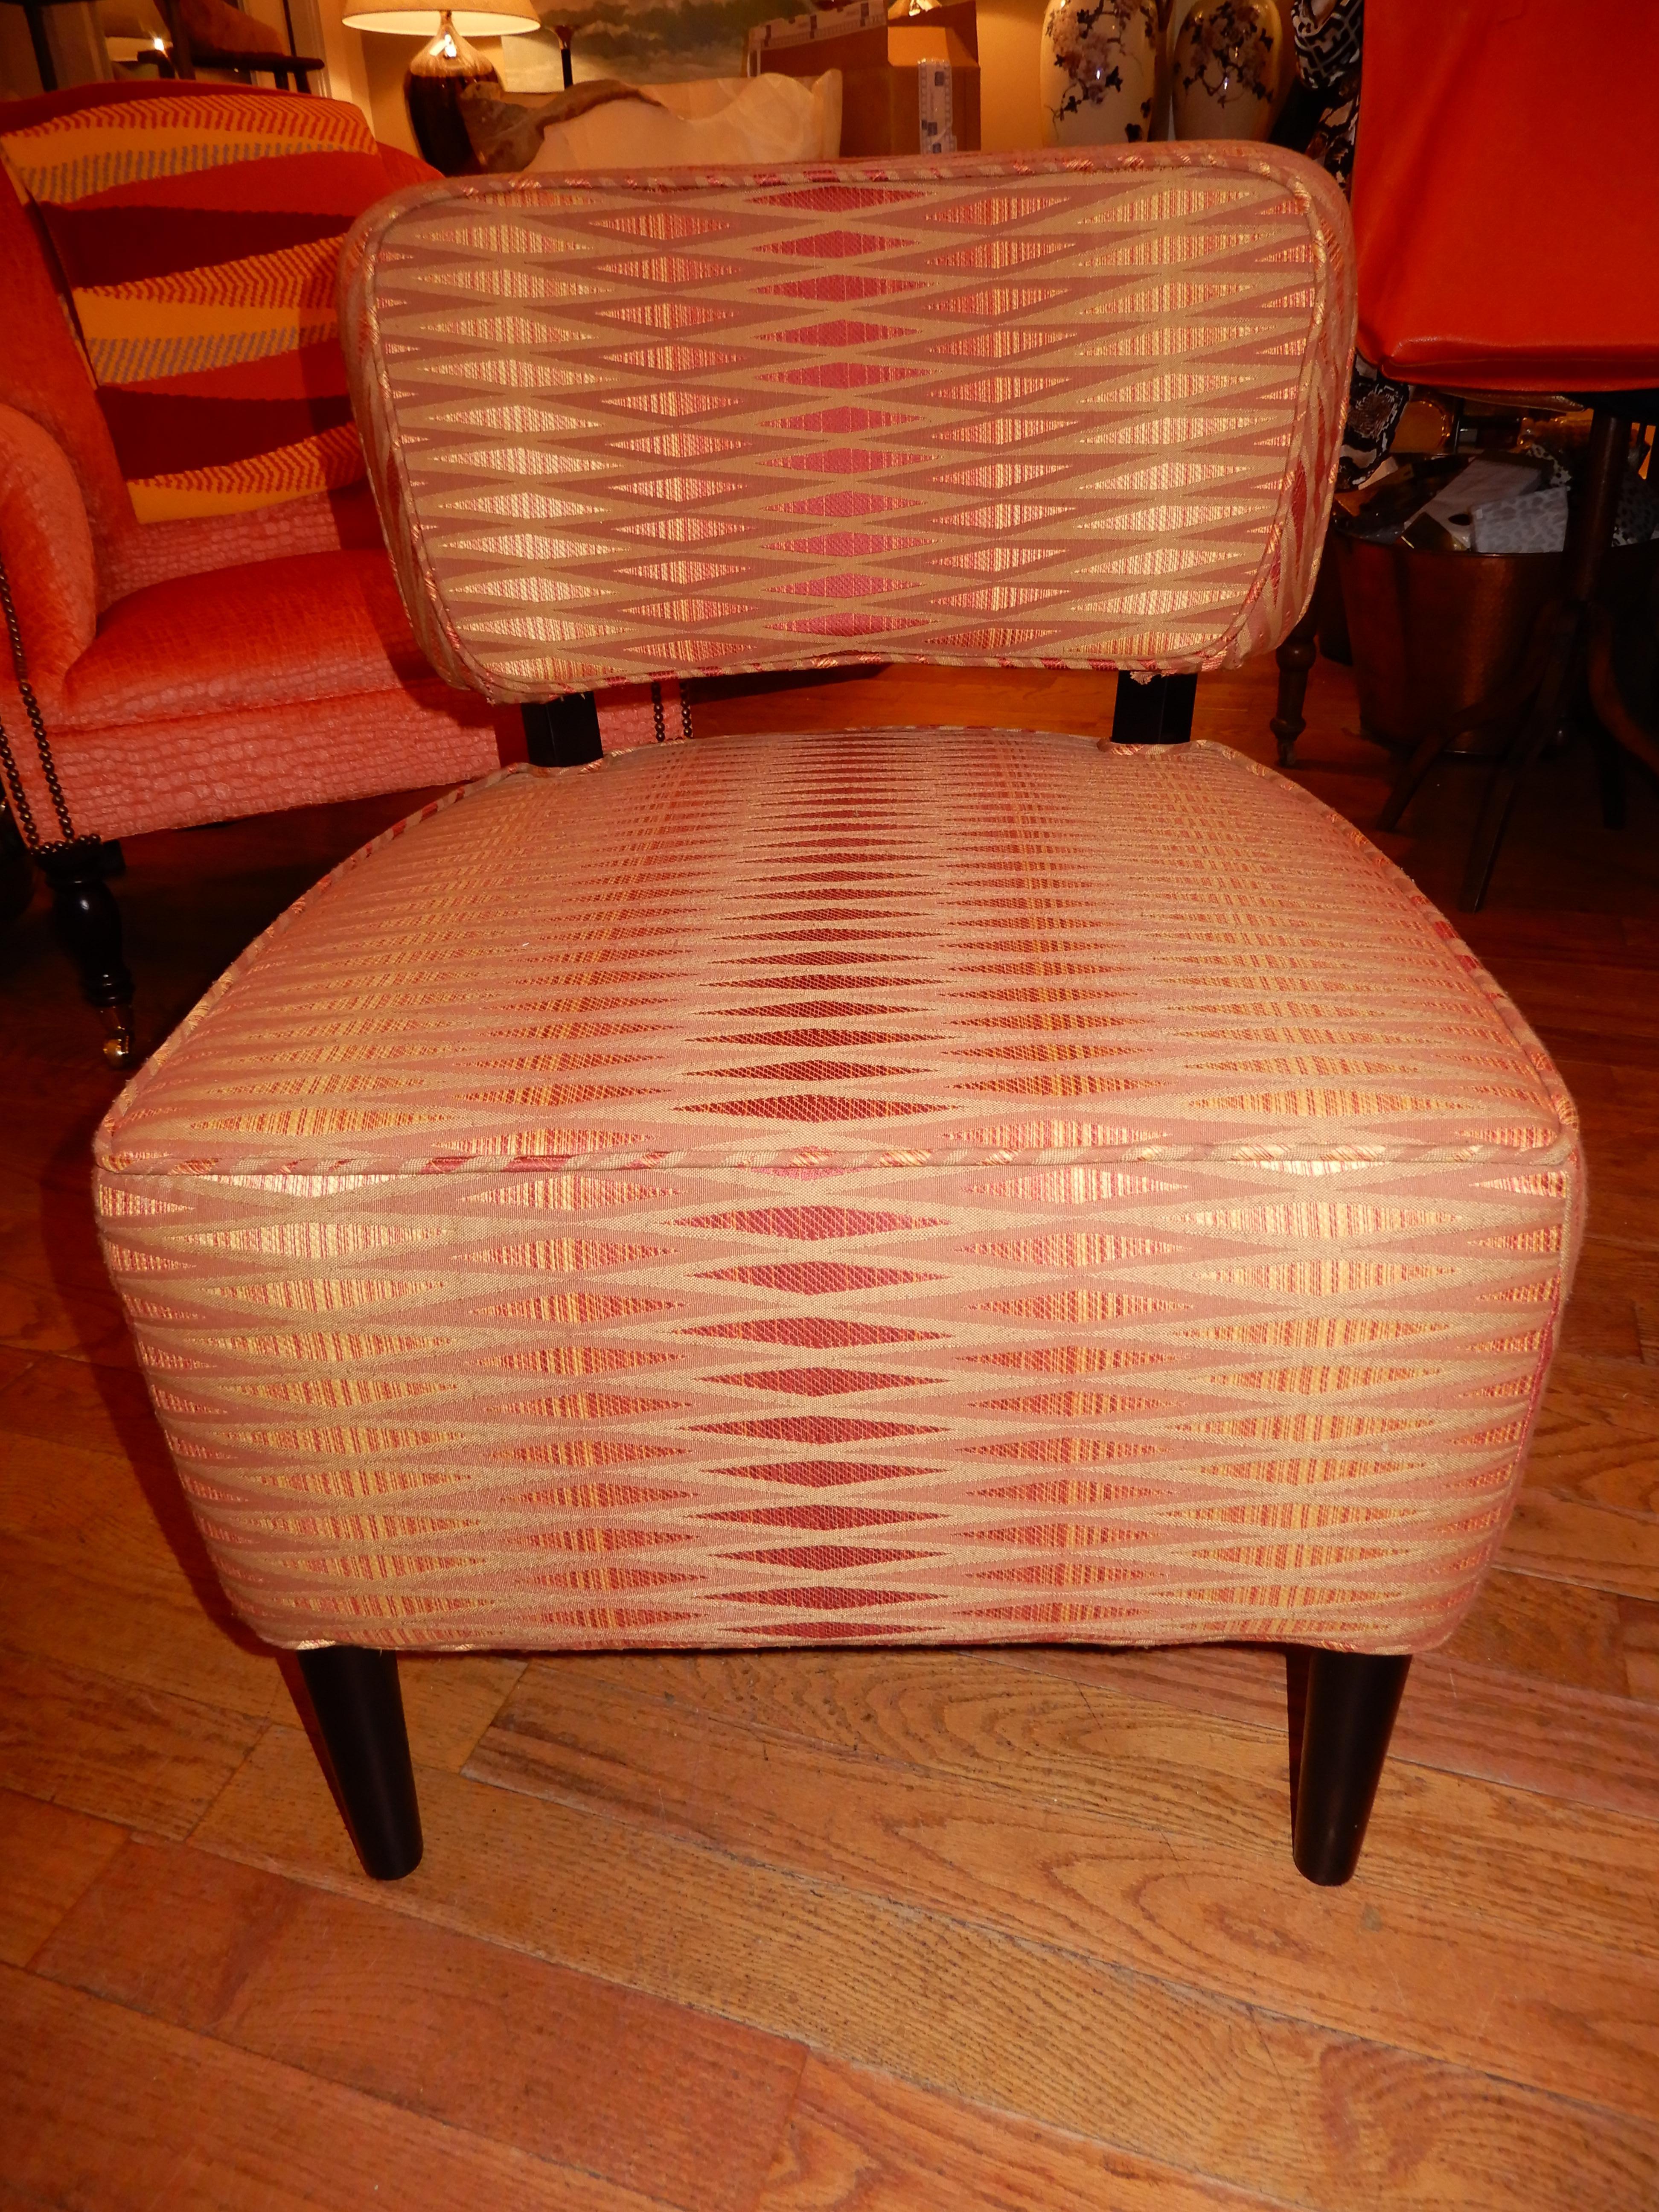 Fabulous pair of Mid-Century Modern side chairs or slipper chairs. Contemporary fabric in shades of rusts, reds, and gold's
Excellent condition, luxuriously comfortable. Ebony wood legs.